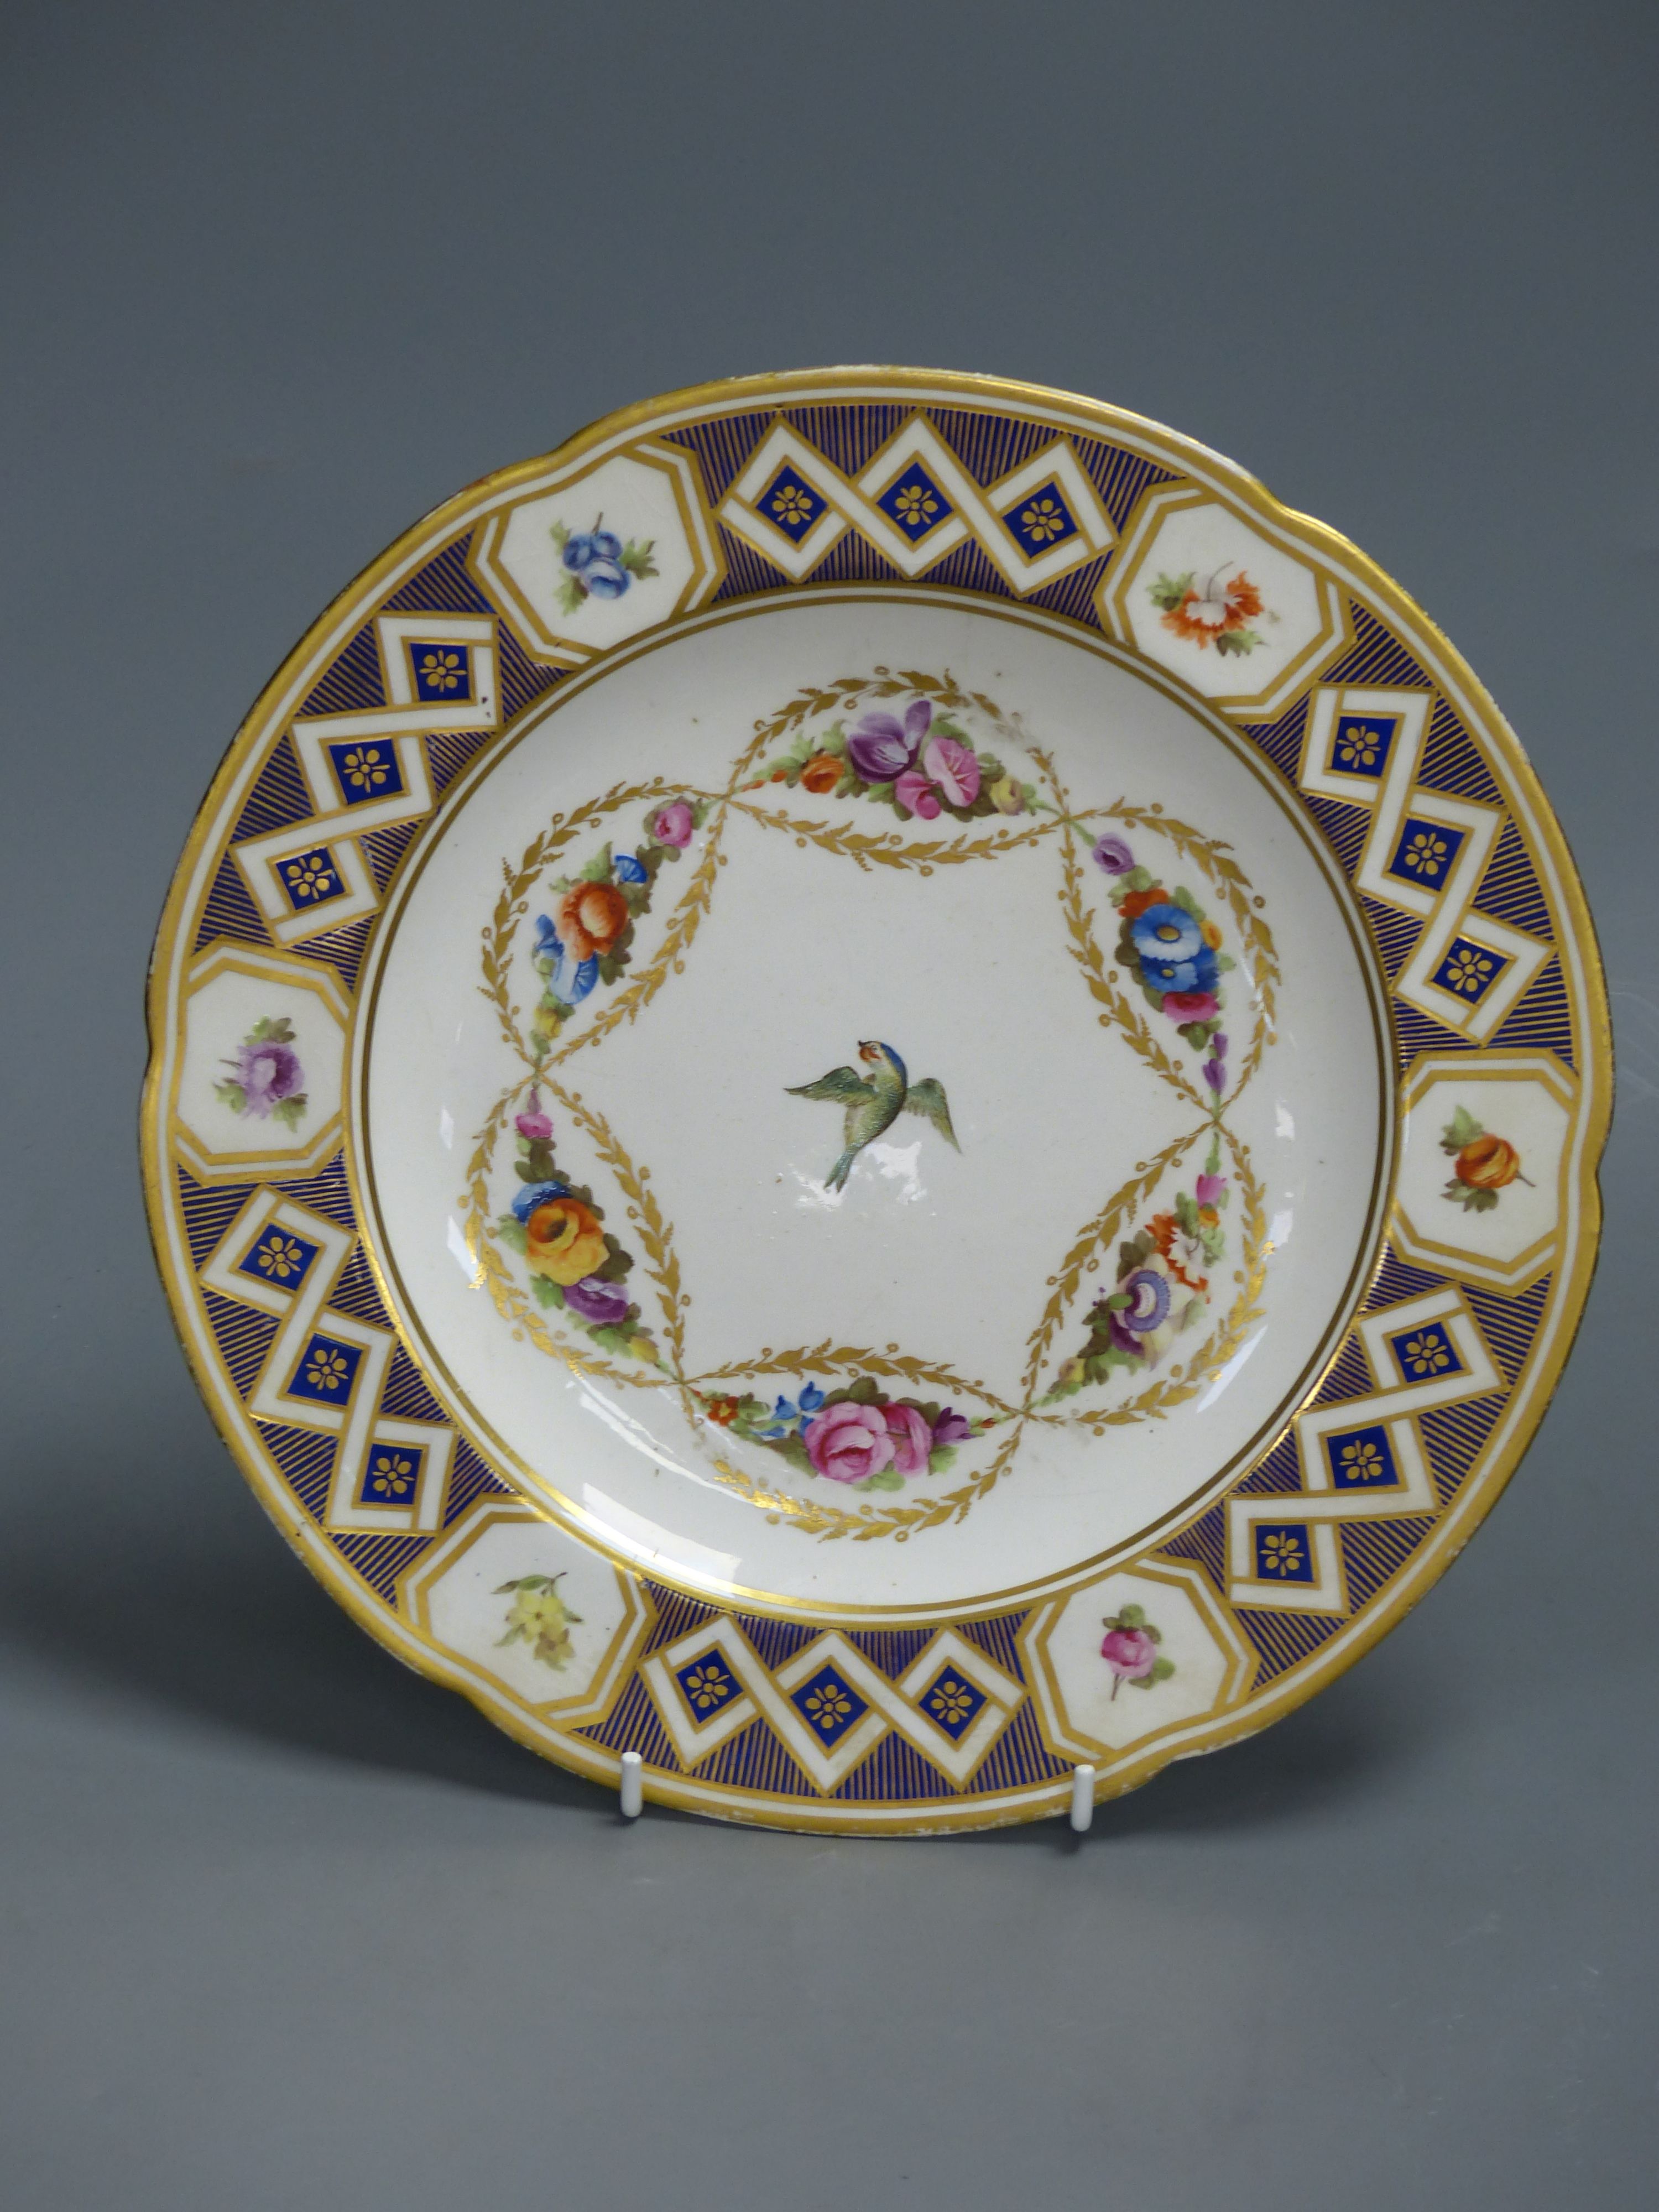 A Derby plate painted with central bird and leafy chains, c.1800, diameter 26.5cm